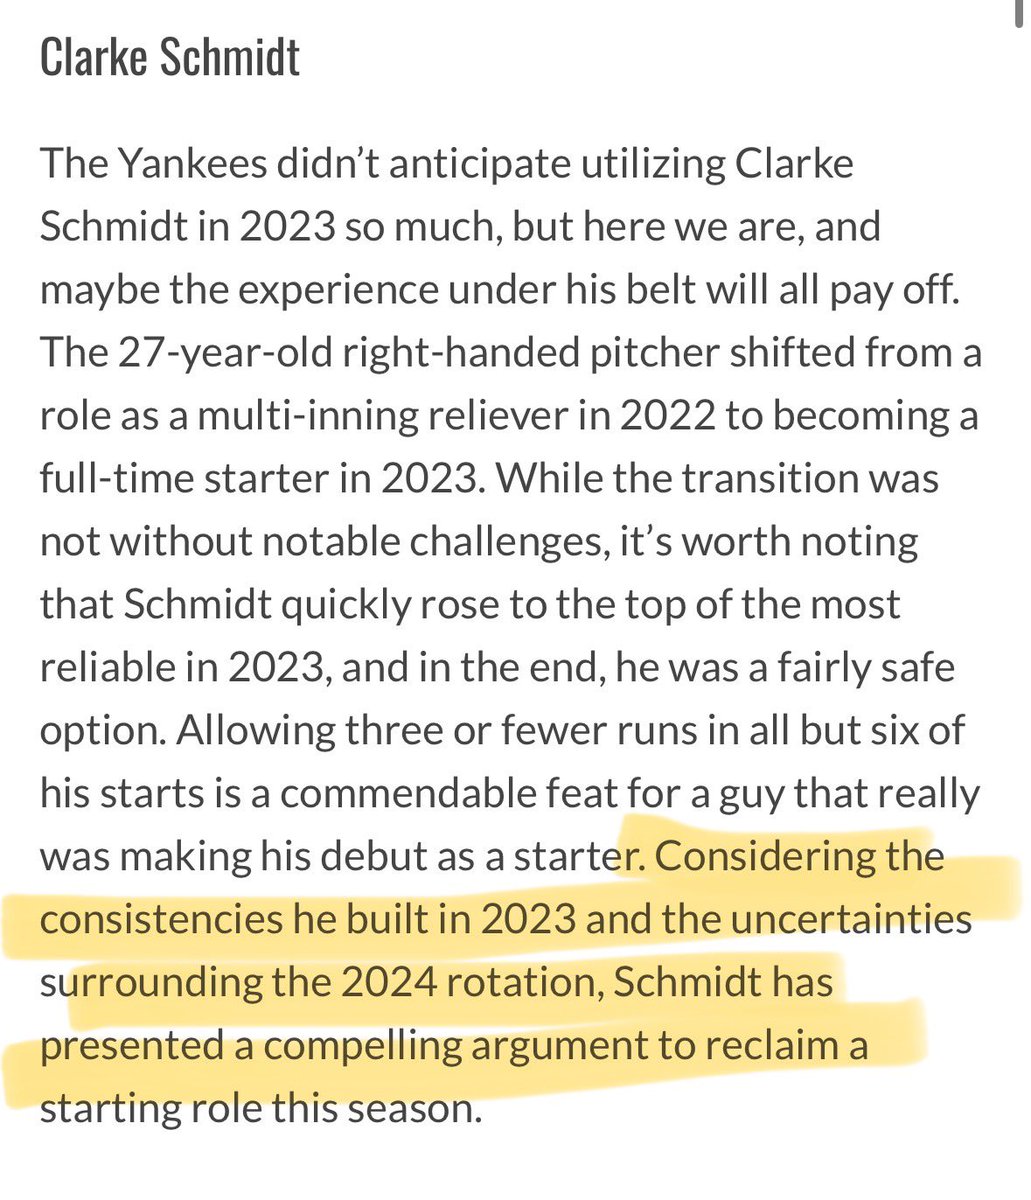 I knew from day one that it would just take Clarke time to build his starter stamina and so far it appears I was right. Patience. He was so used to being a multi-innings reliever and overnight became a starter we heavily relied on. He’s finding it. 💪🏽 Wrote this on January 10th.